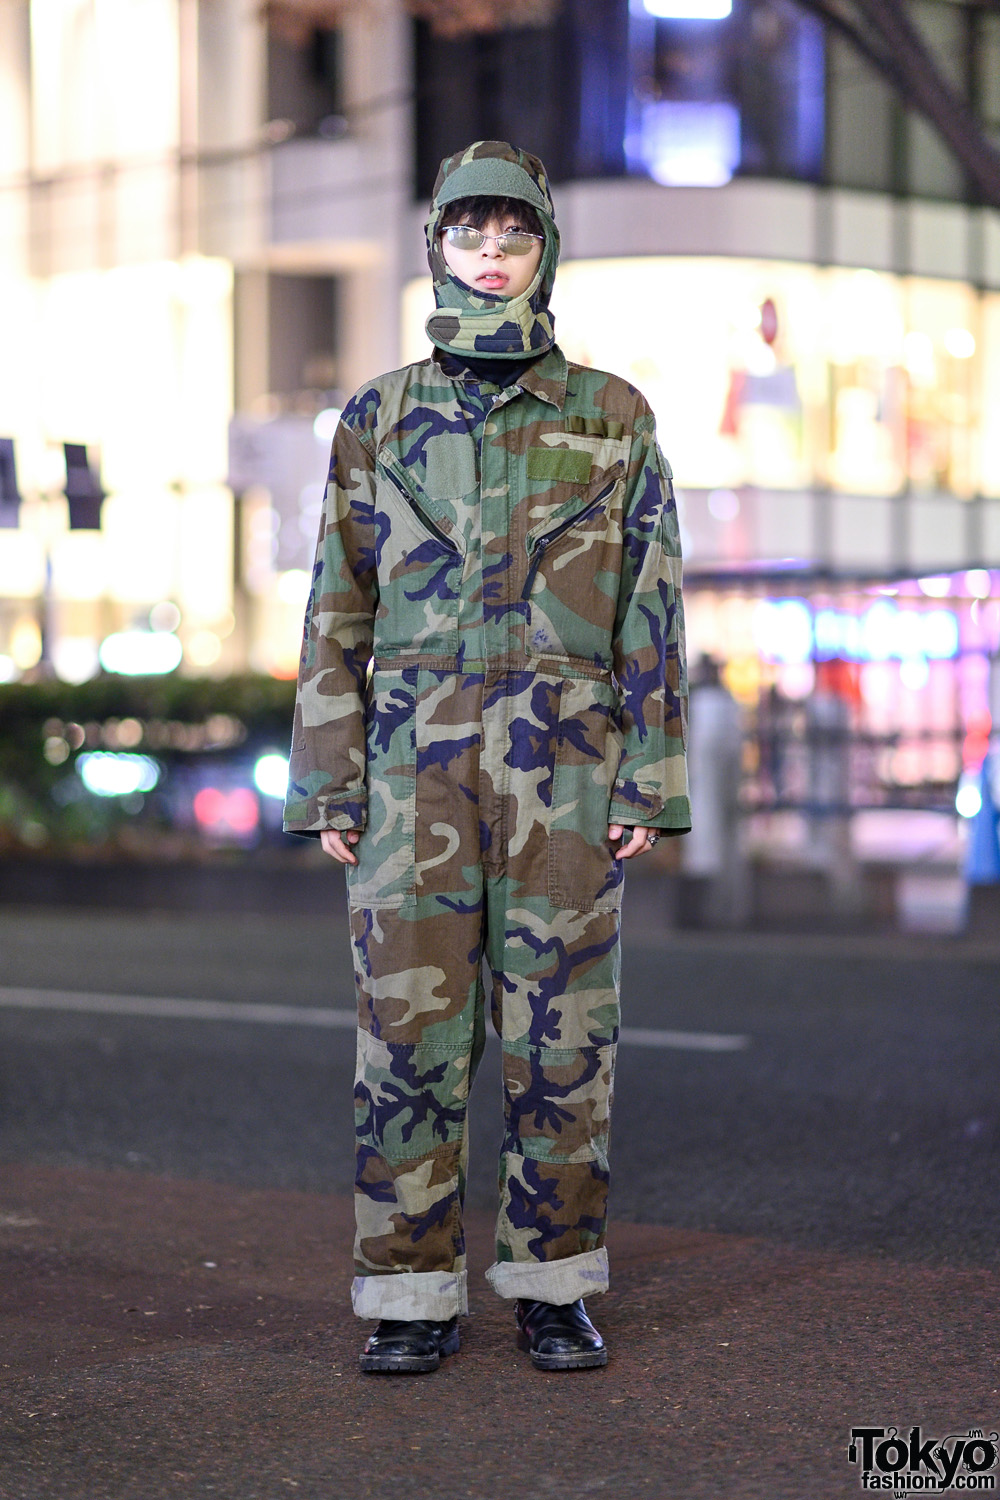 Camouflage Streetwear Style in Harajuku w/ Cuffed Overalls, Matching Camo Head Gear & Leather Boots